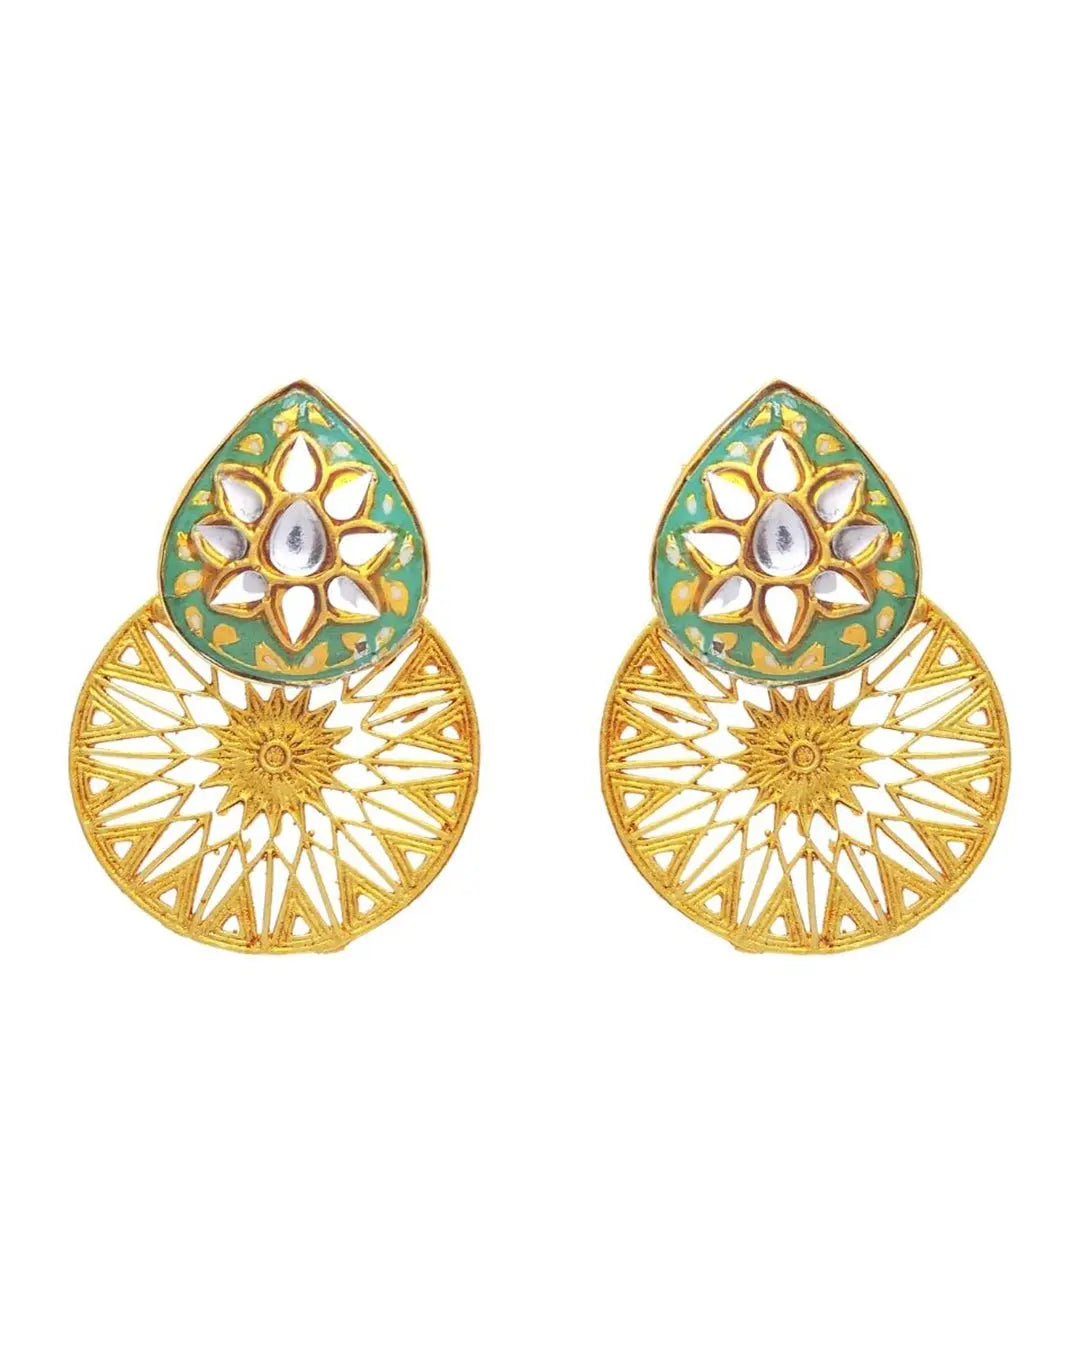 Arfa Earrings (Forest)- Handcrafted Jewellery from Dori